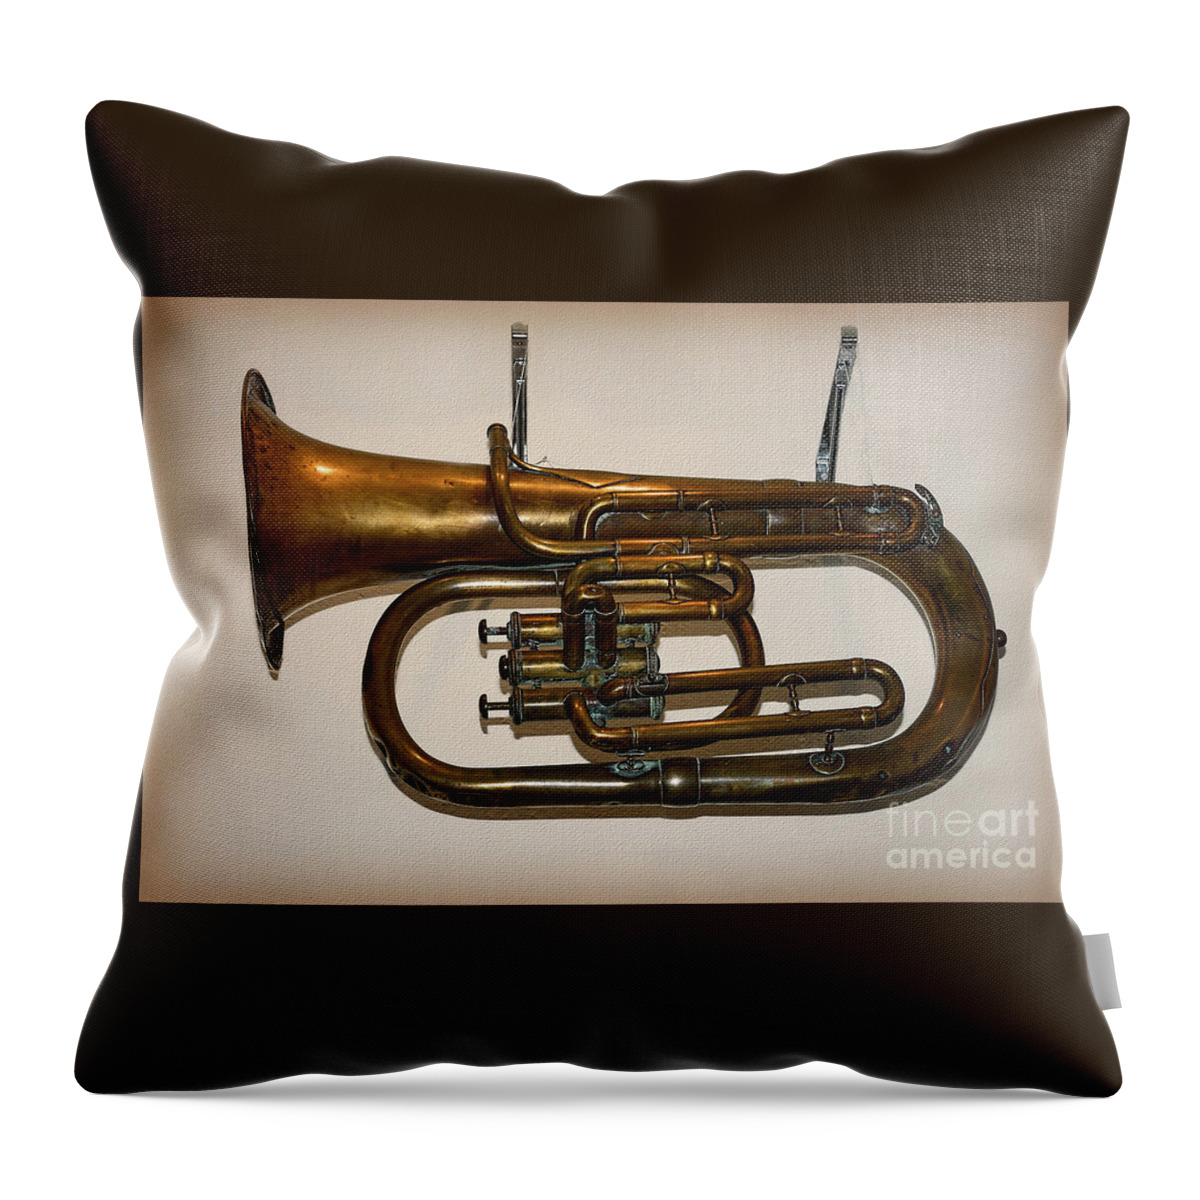 Baritone Horn 1910 Throw Pillow featuring the photograph Baritone Horn 1910 by Kaye Menner by Kaye Menner